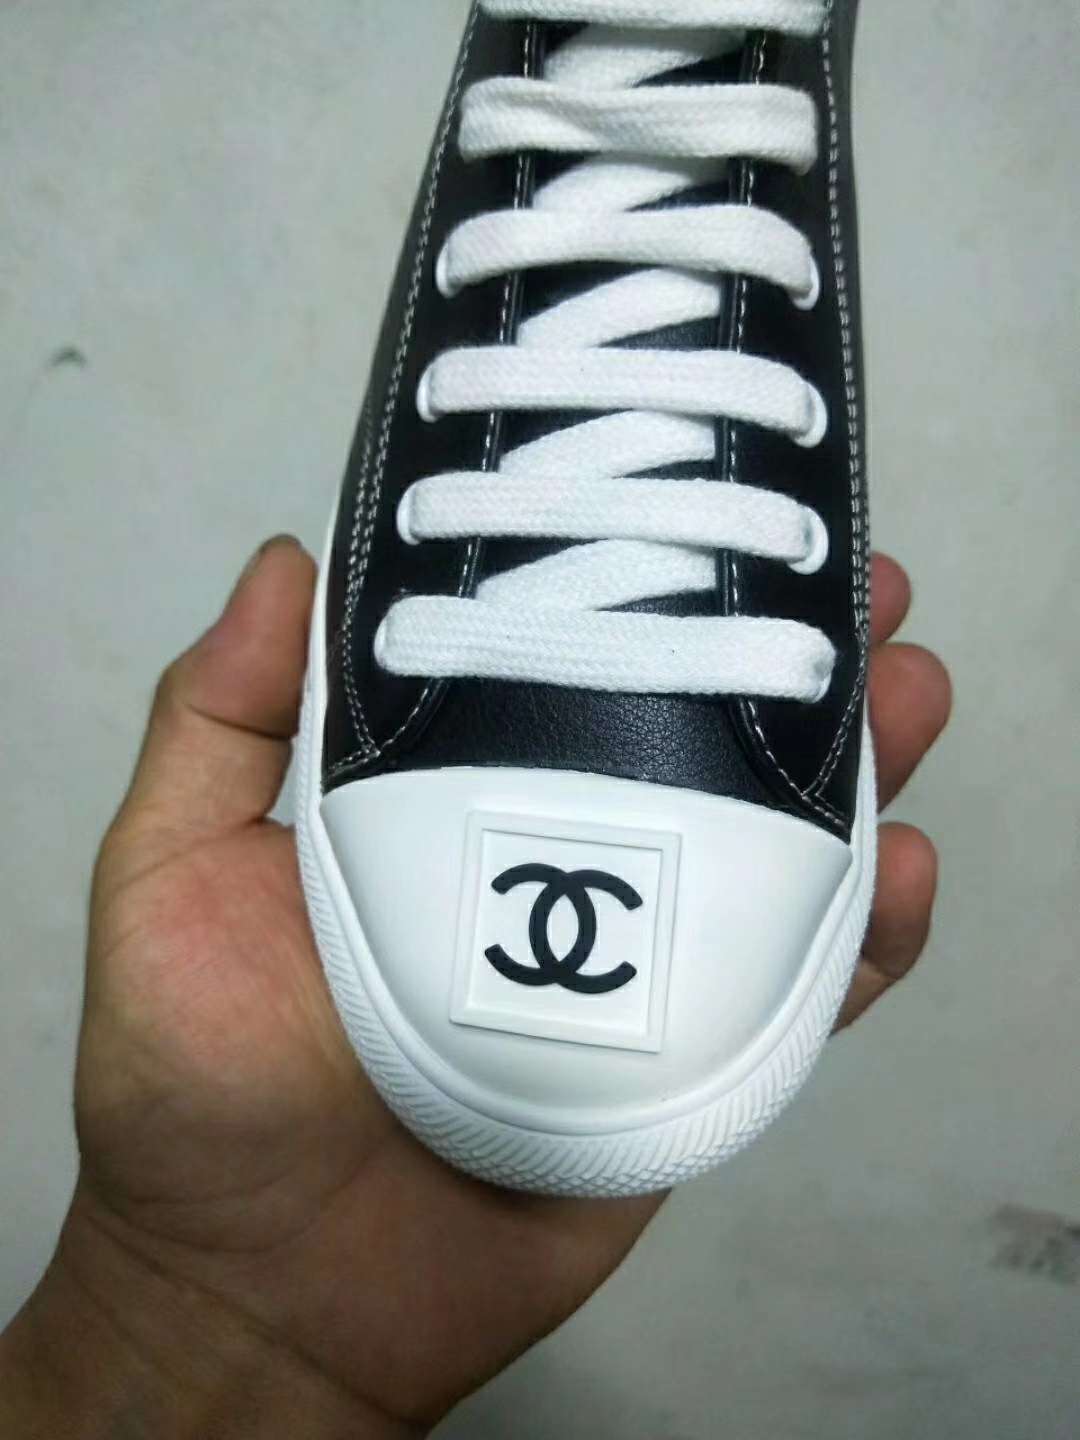 2019 NEW Chanel Real leather shoes 1026 black white